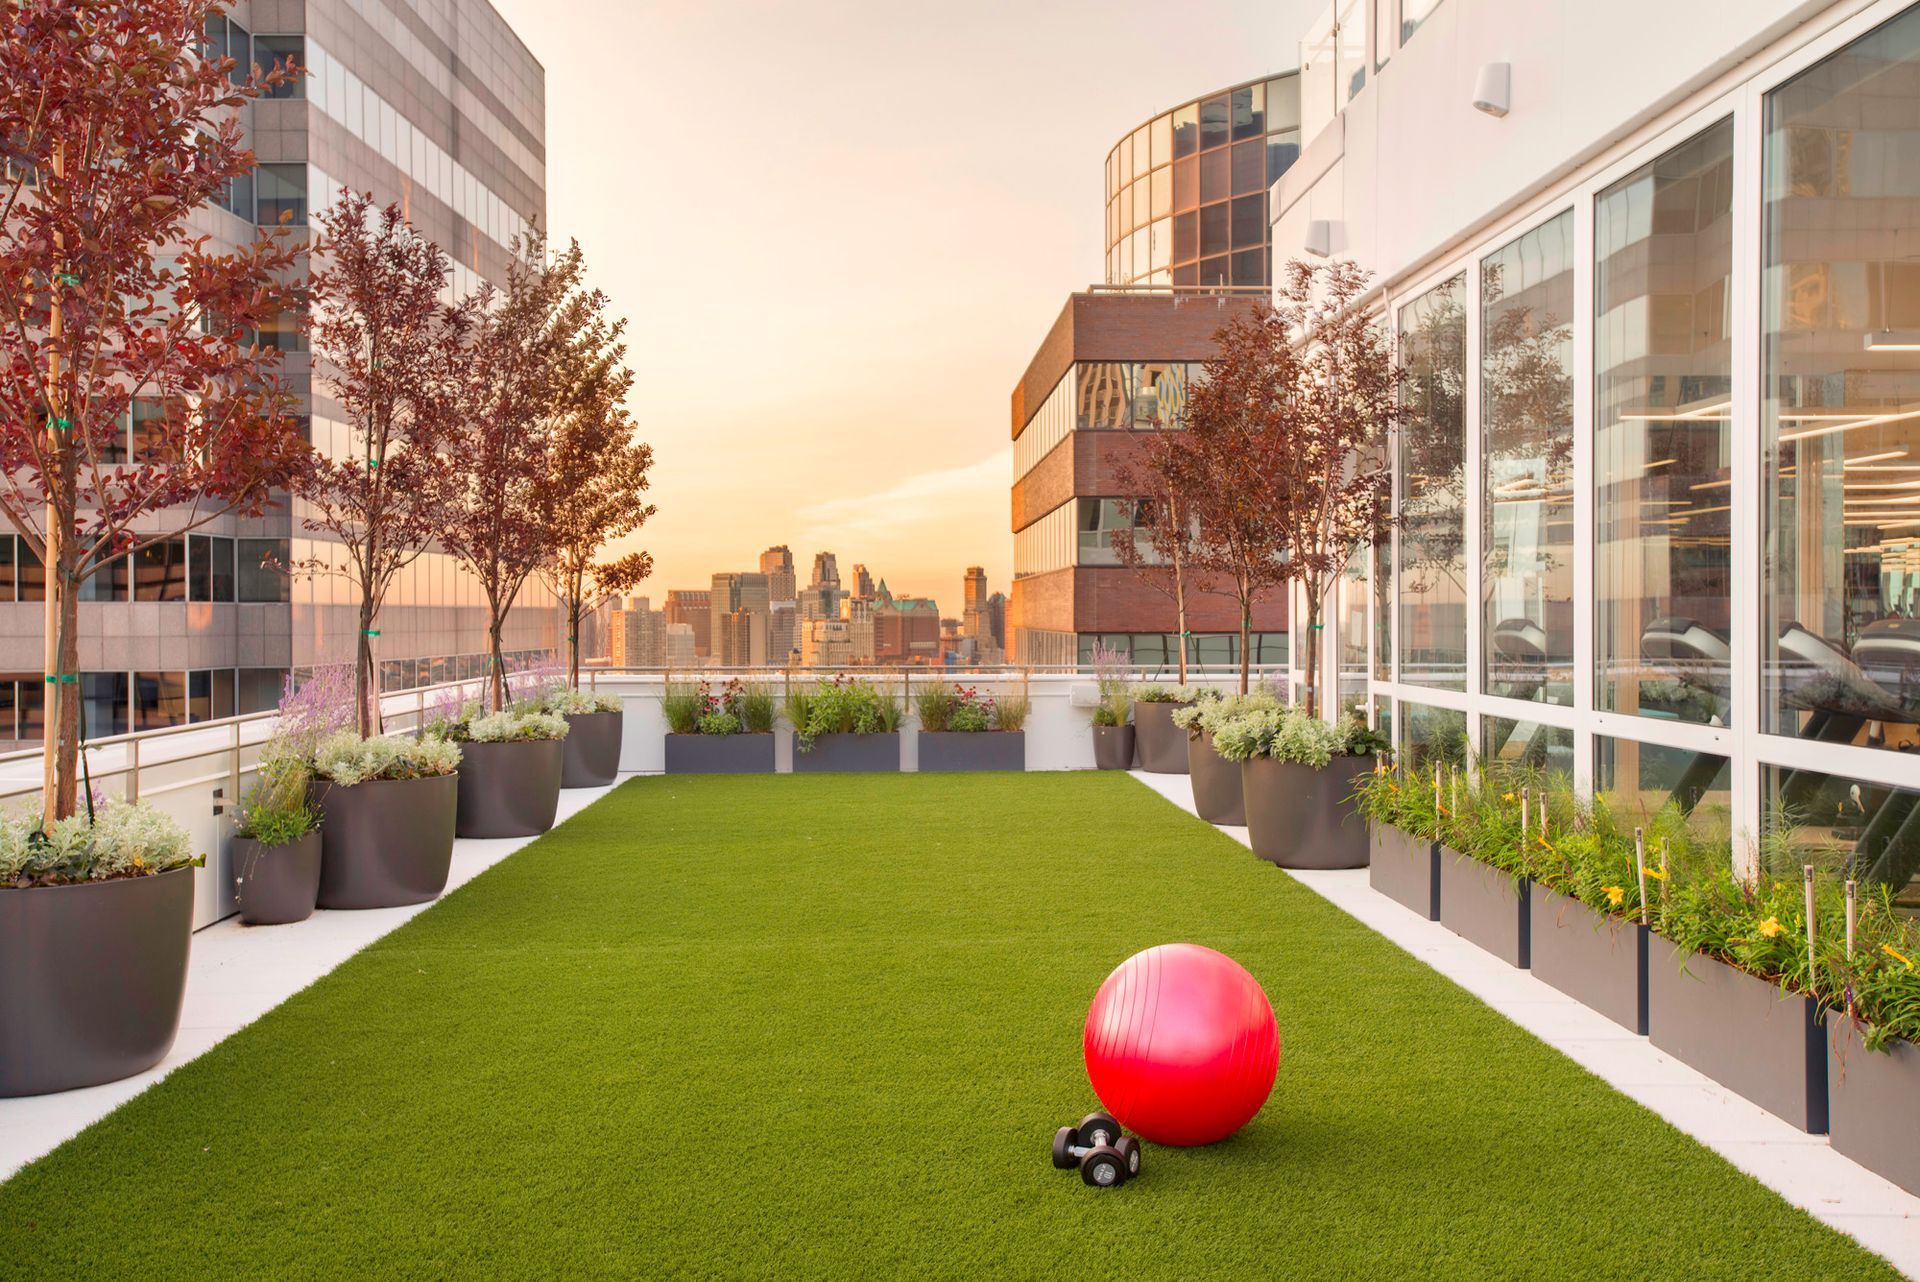 A red ball is sitting on top of a lush green lawn.